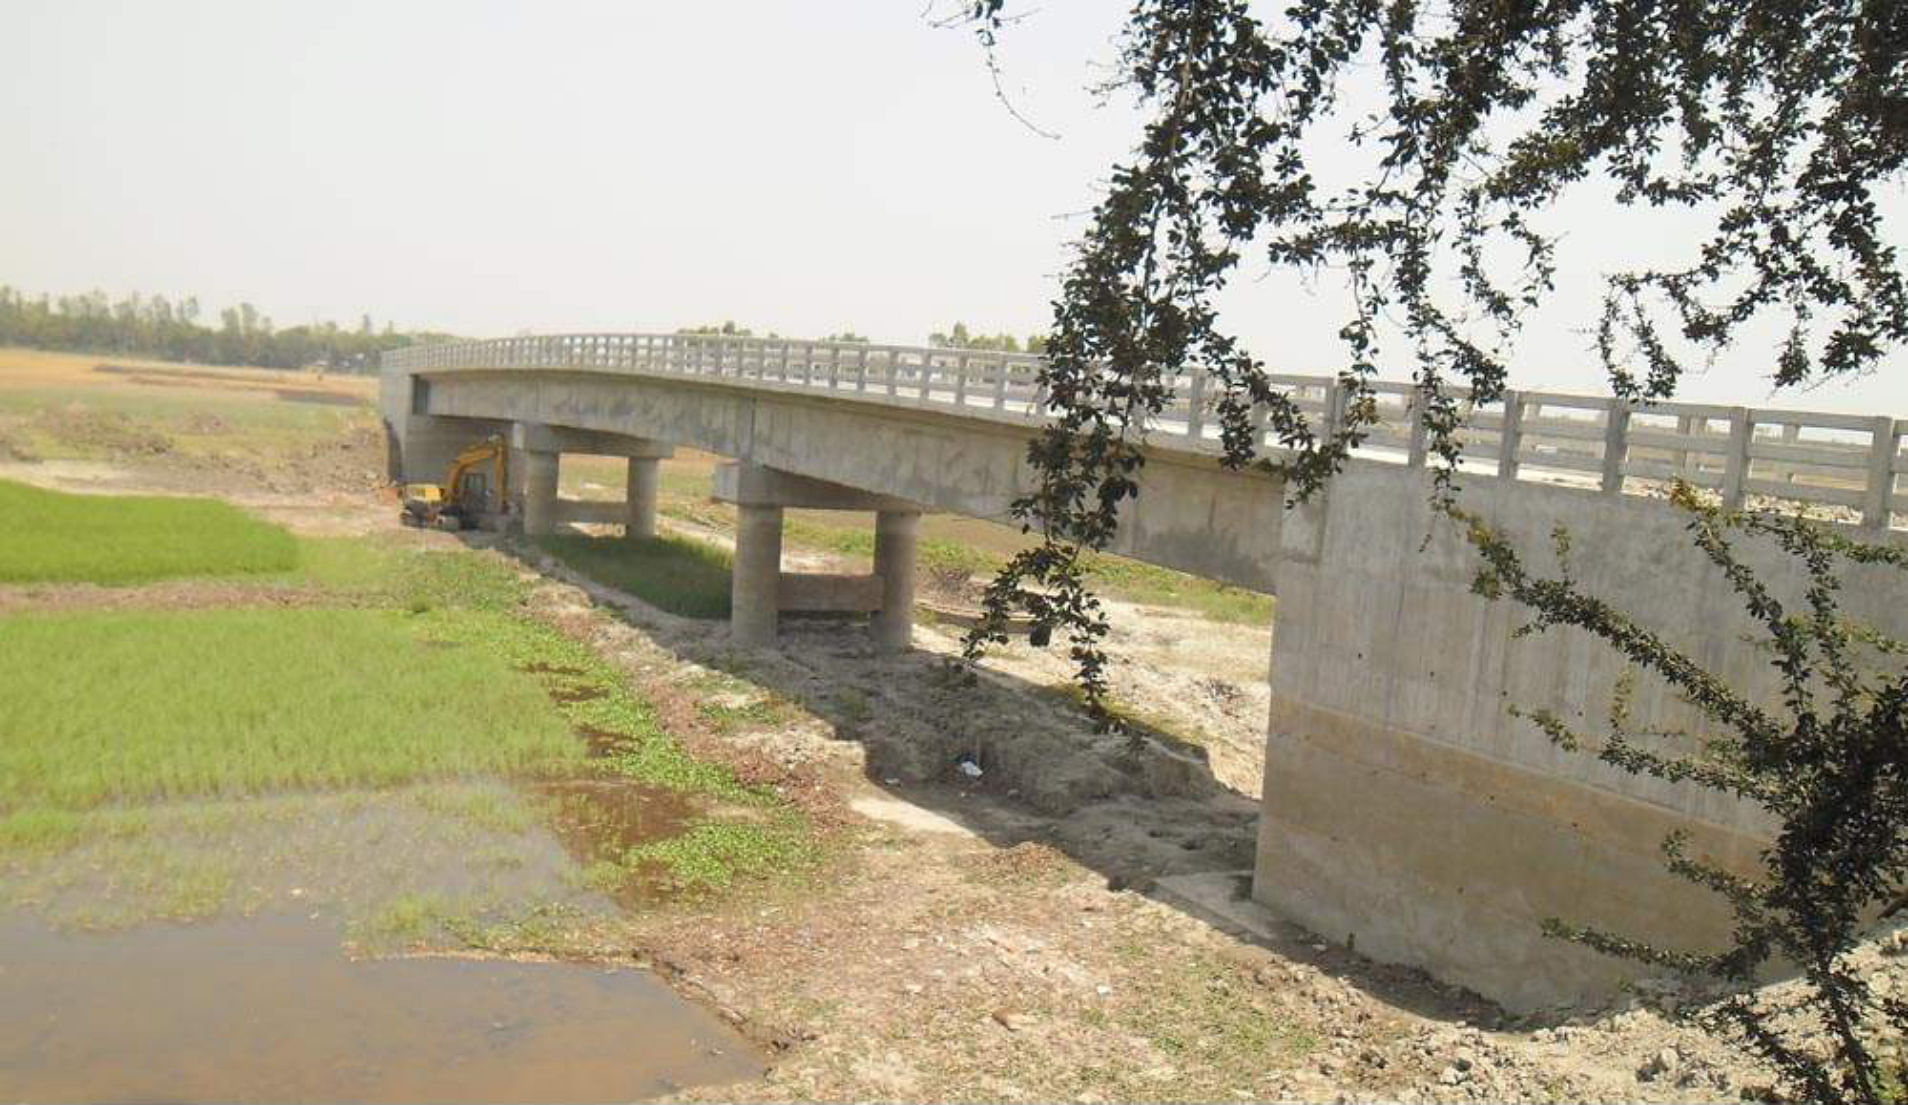 This bridge over Kodomtala canal at Aminpur village in Bera upazila under Pabna district remains a mockery for locals since completion of its construction a year ago as it cannot be used due to lack of an approach road. PHOTO: STAR